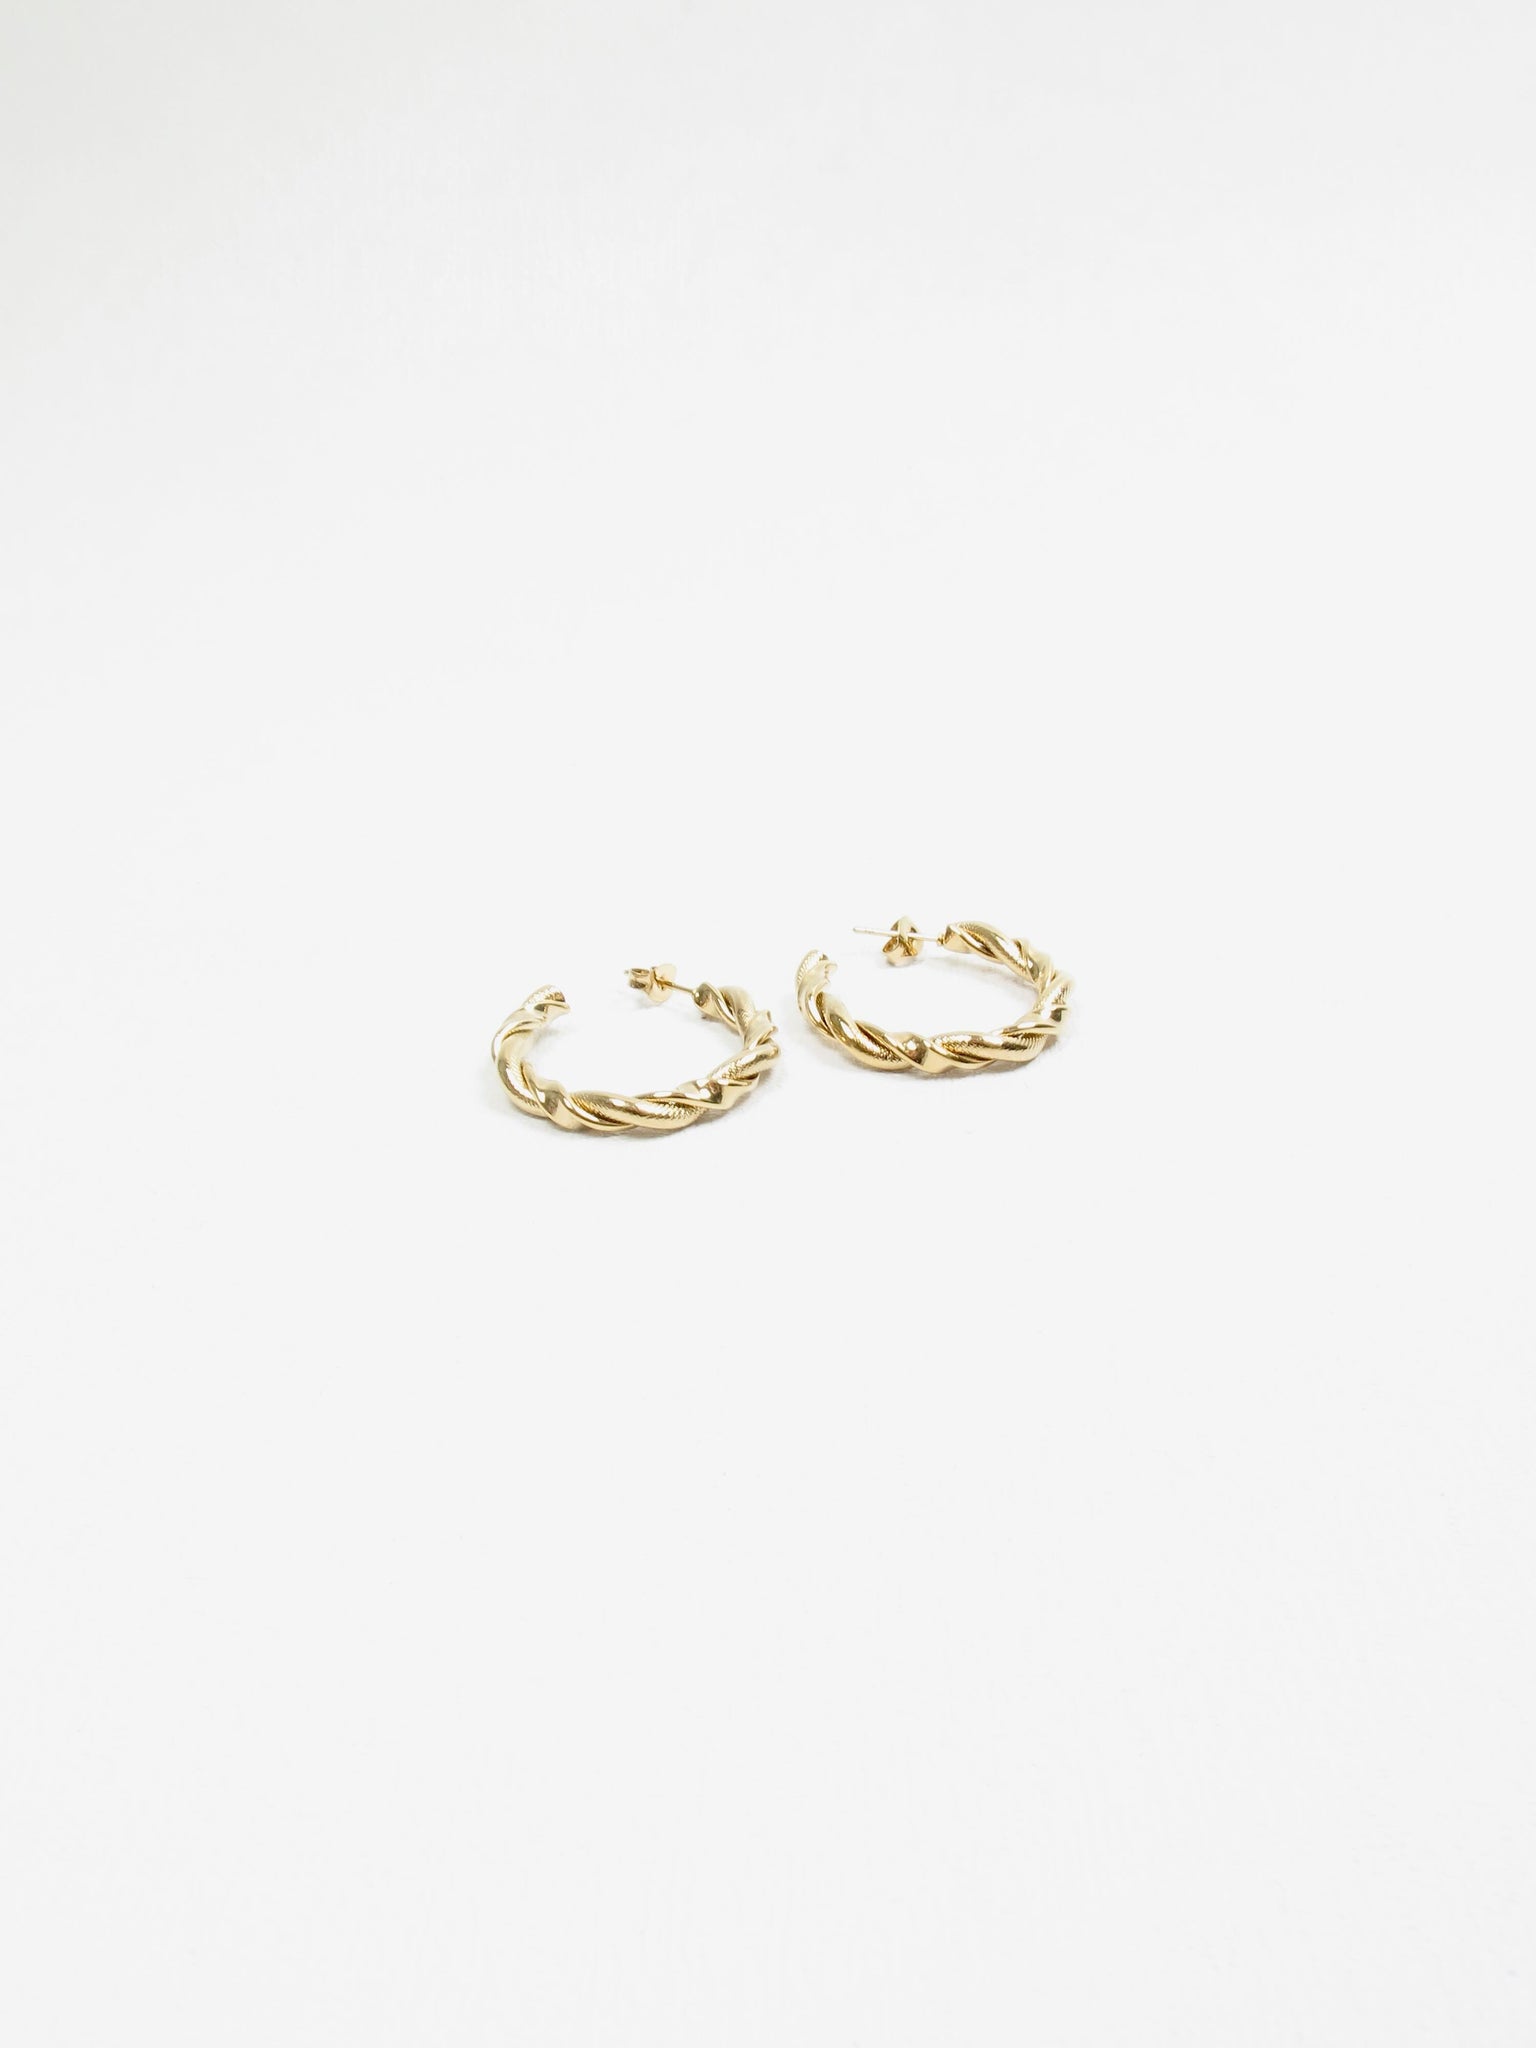 Gold Coloured Hoop Earrings Twisted Design New - The Harlequin